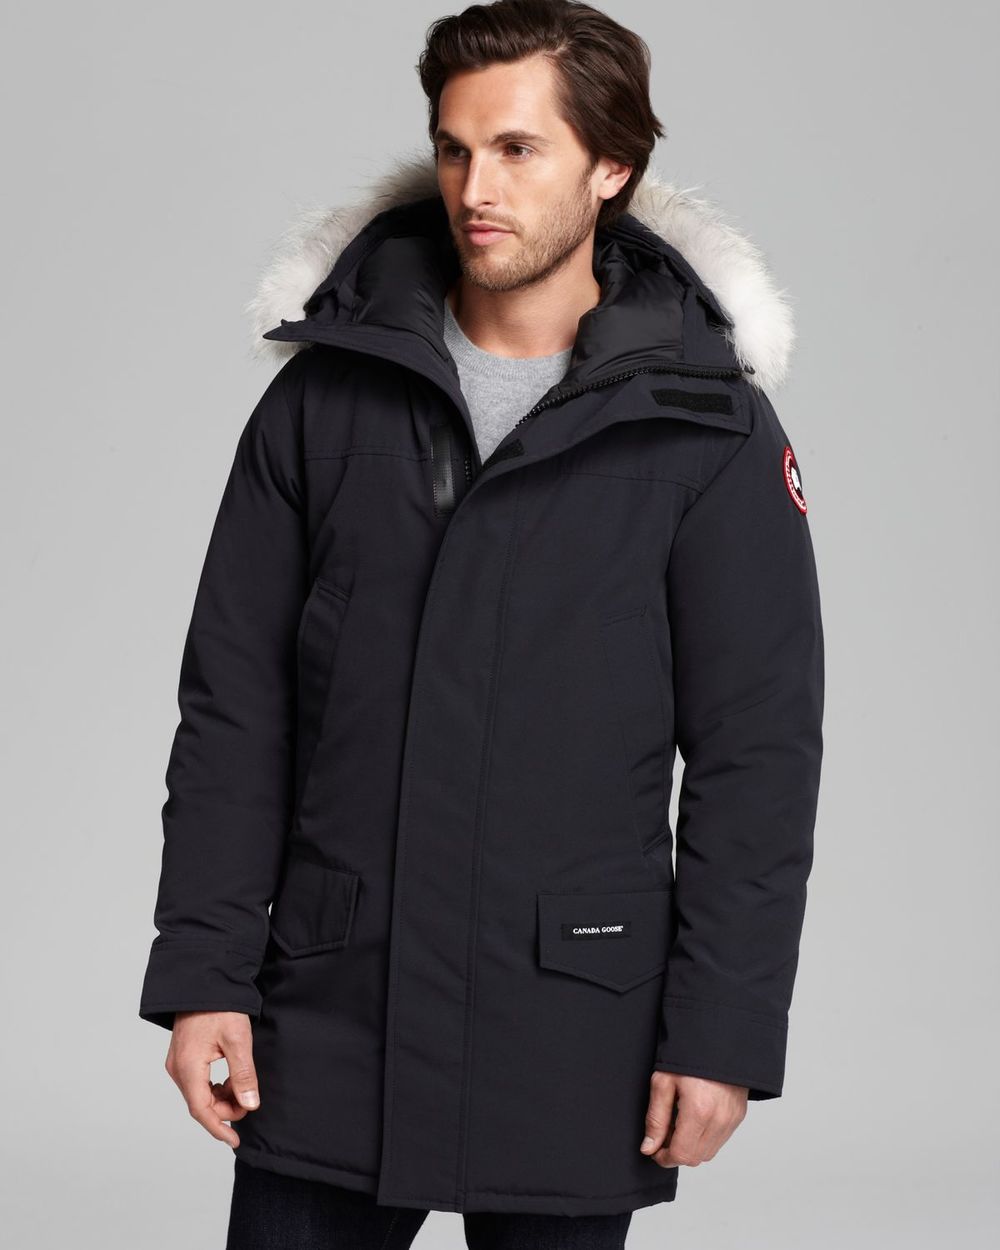 Canada Goose victoria parka online official - 9 Canada Goose Alternatives To Fit Every Budget �� AS RAKESTRAW ...